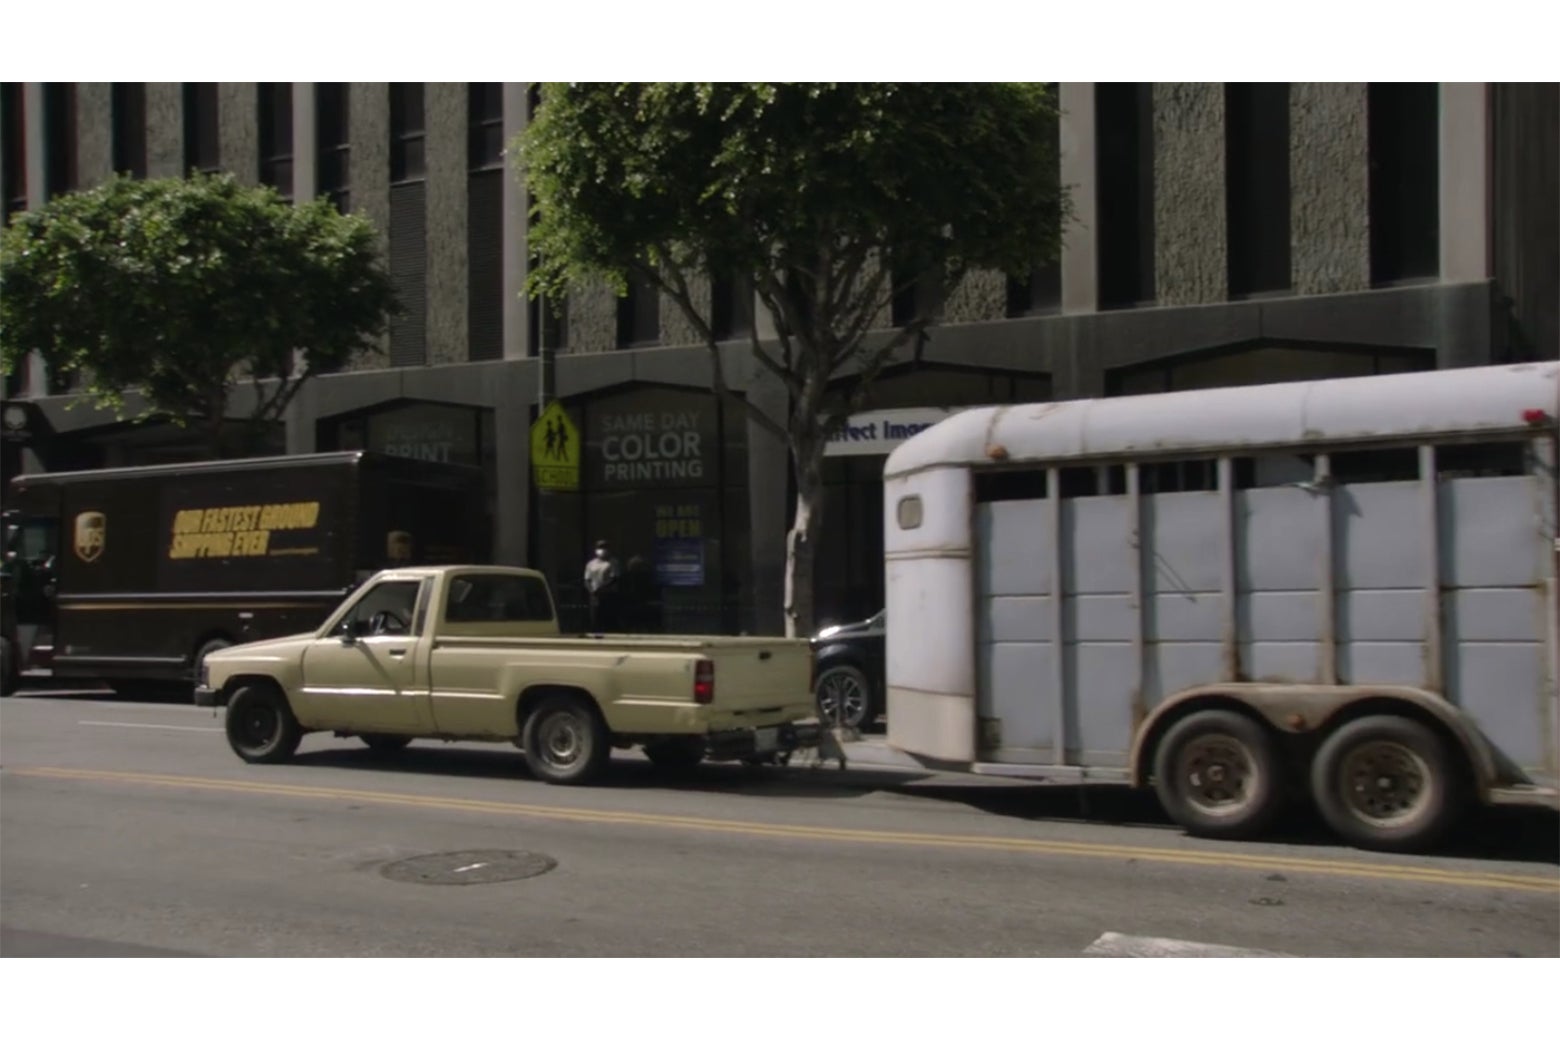 A pickup truck pulling a horse trailer down a Los Angeles street.